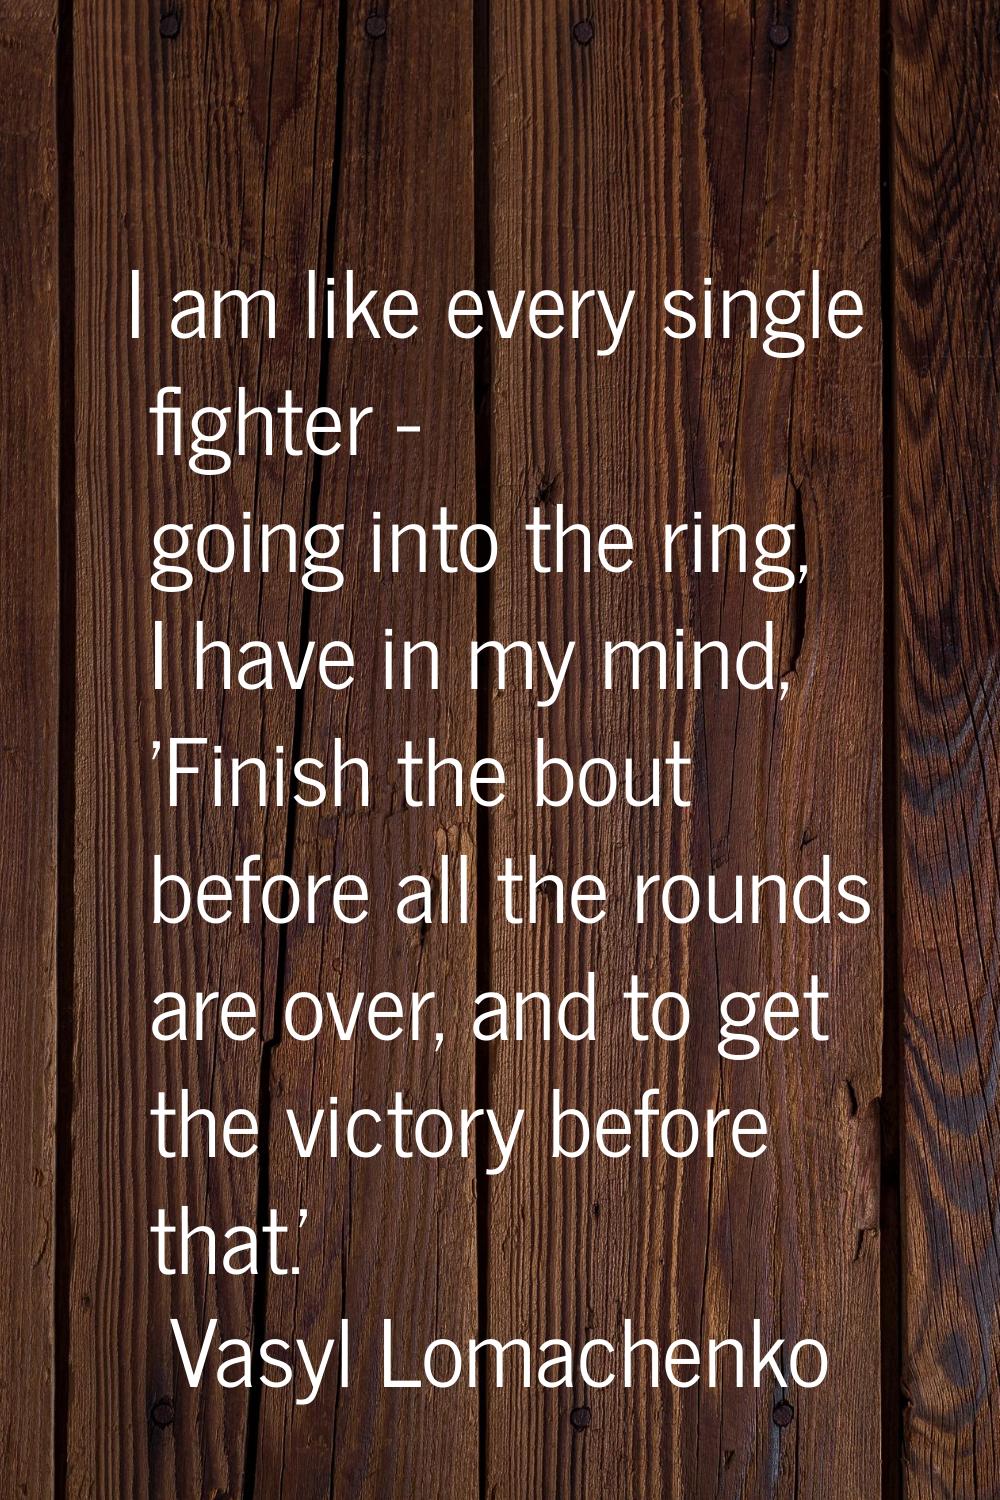 I am like every single fighter - going into the ring, I have in my mind, 'Finish the bout before al